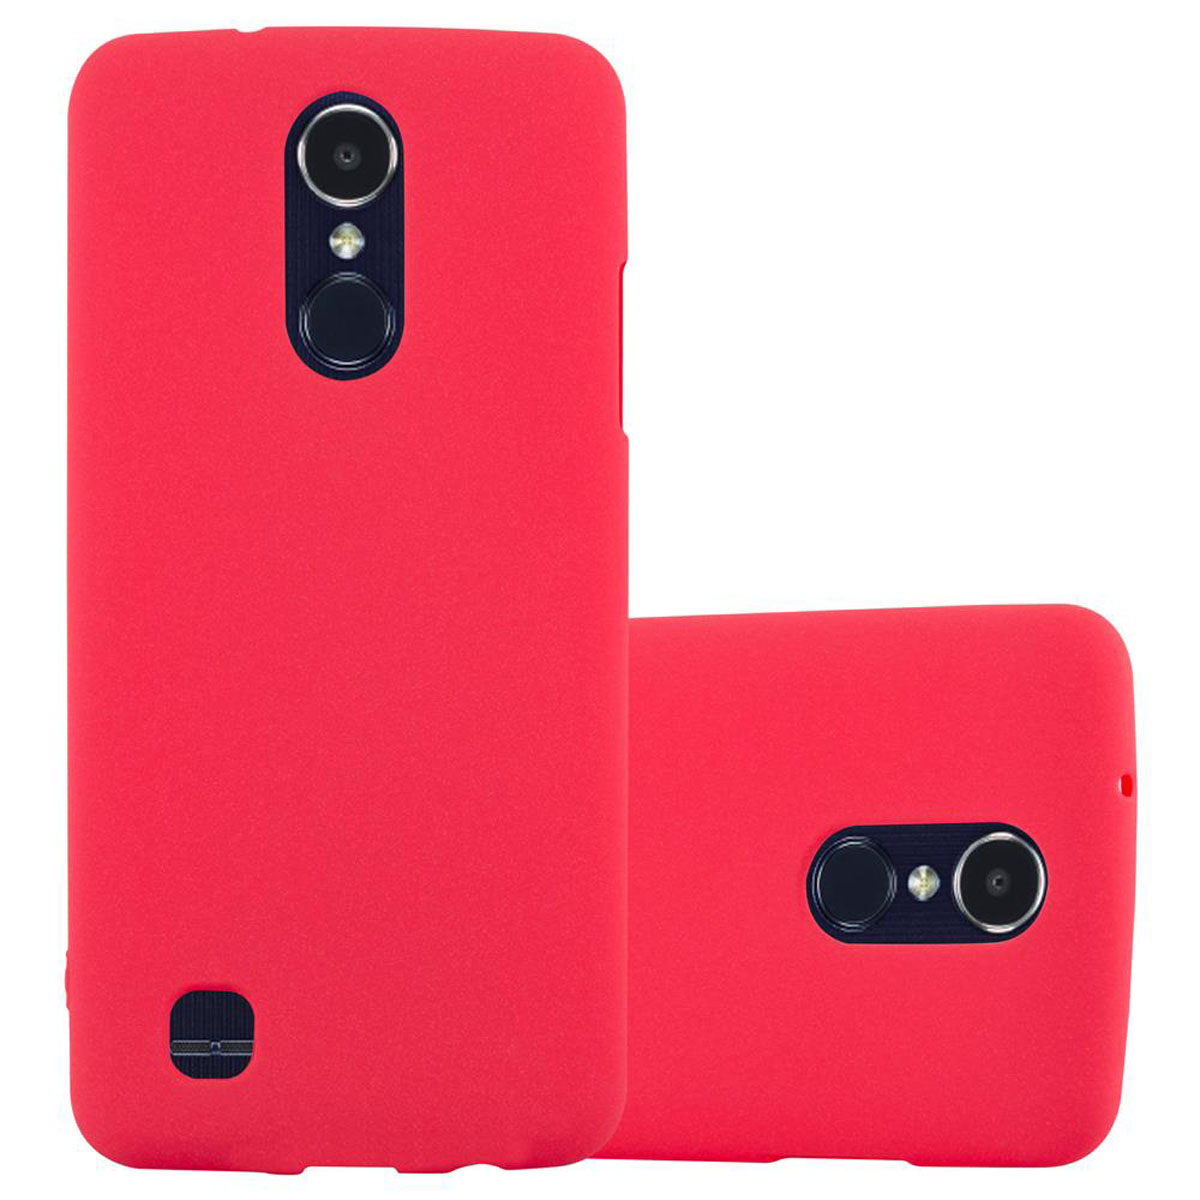 TPU FROST Schutzhülle, K8 Version, ROT US LG, Backcover, Frosted 2017 CADORABO